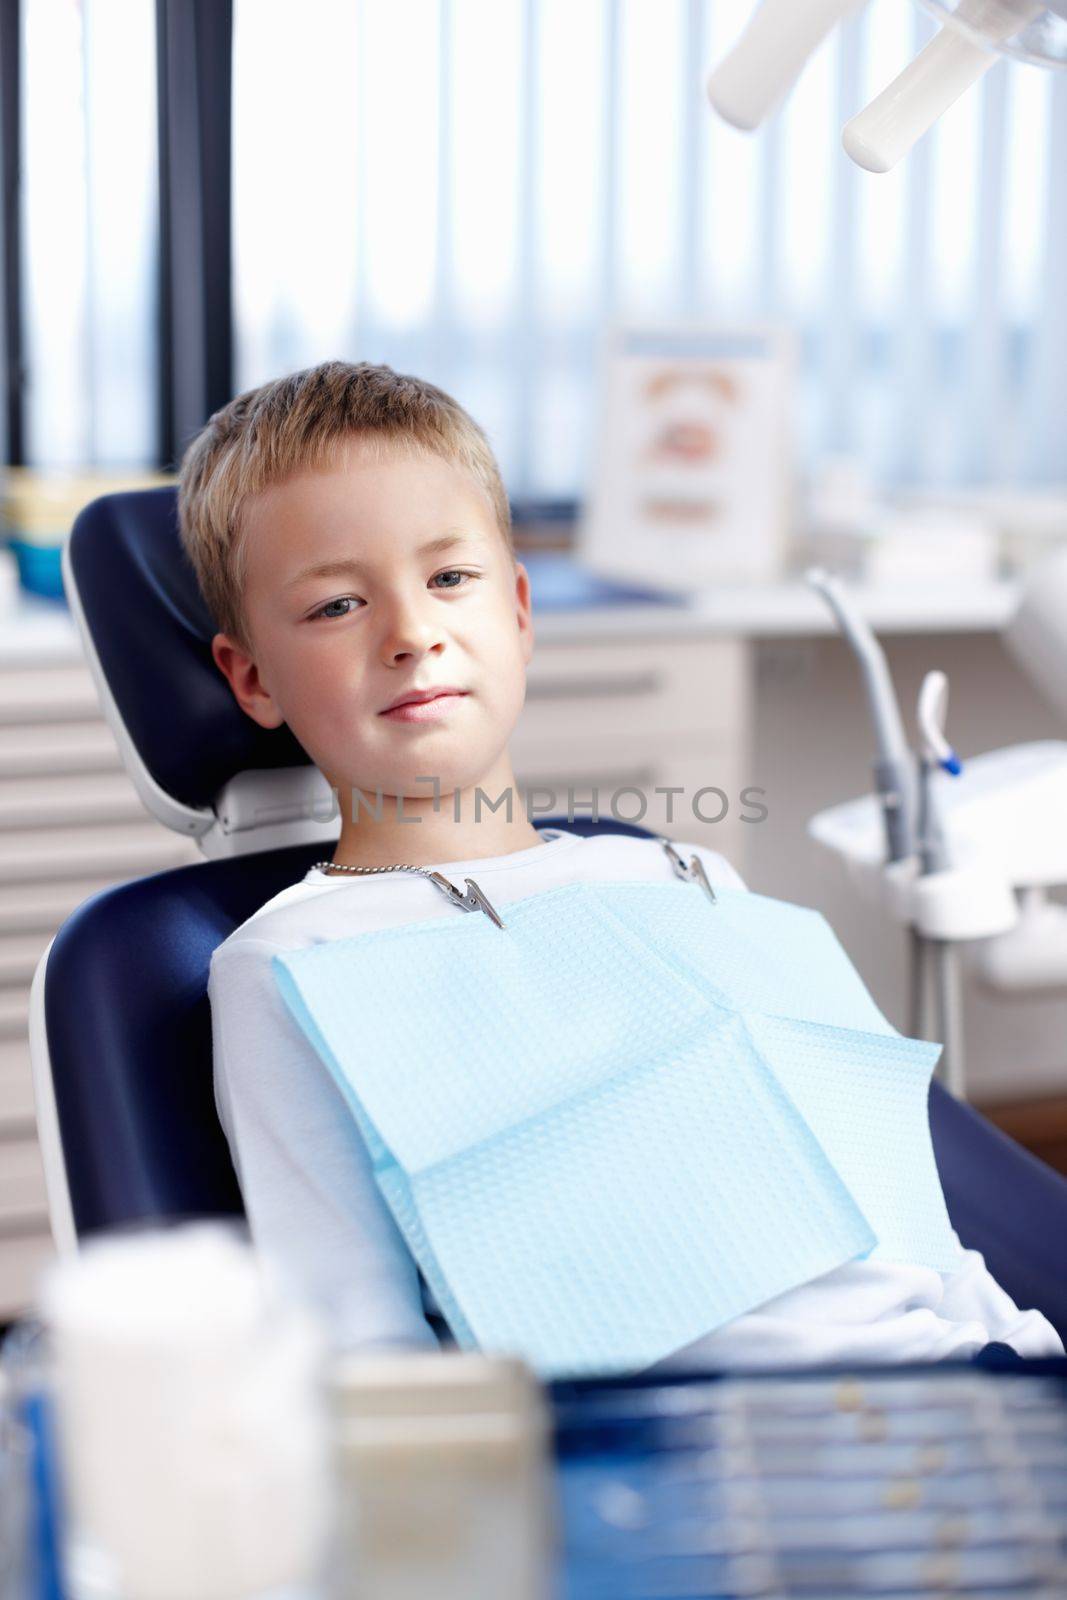 Child at dentist. Portrait of innocent small child at dentist office